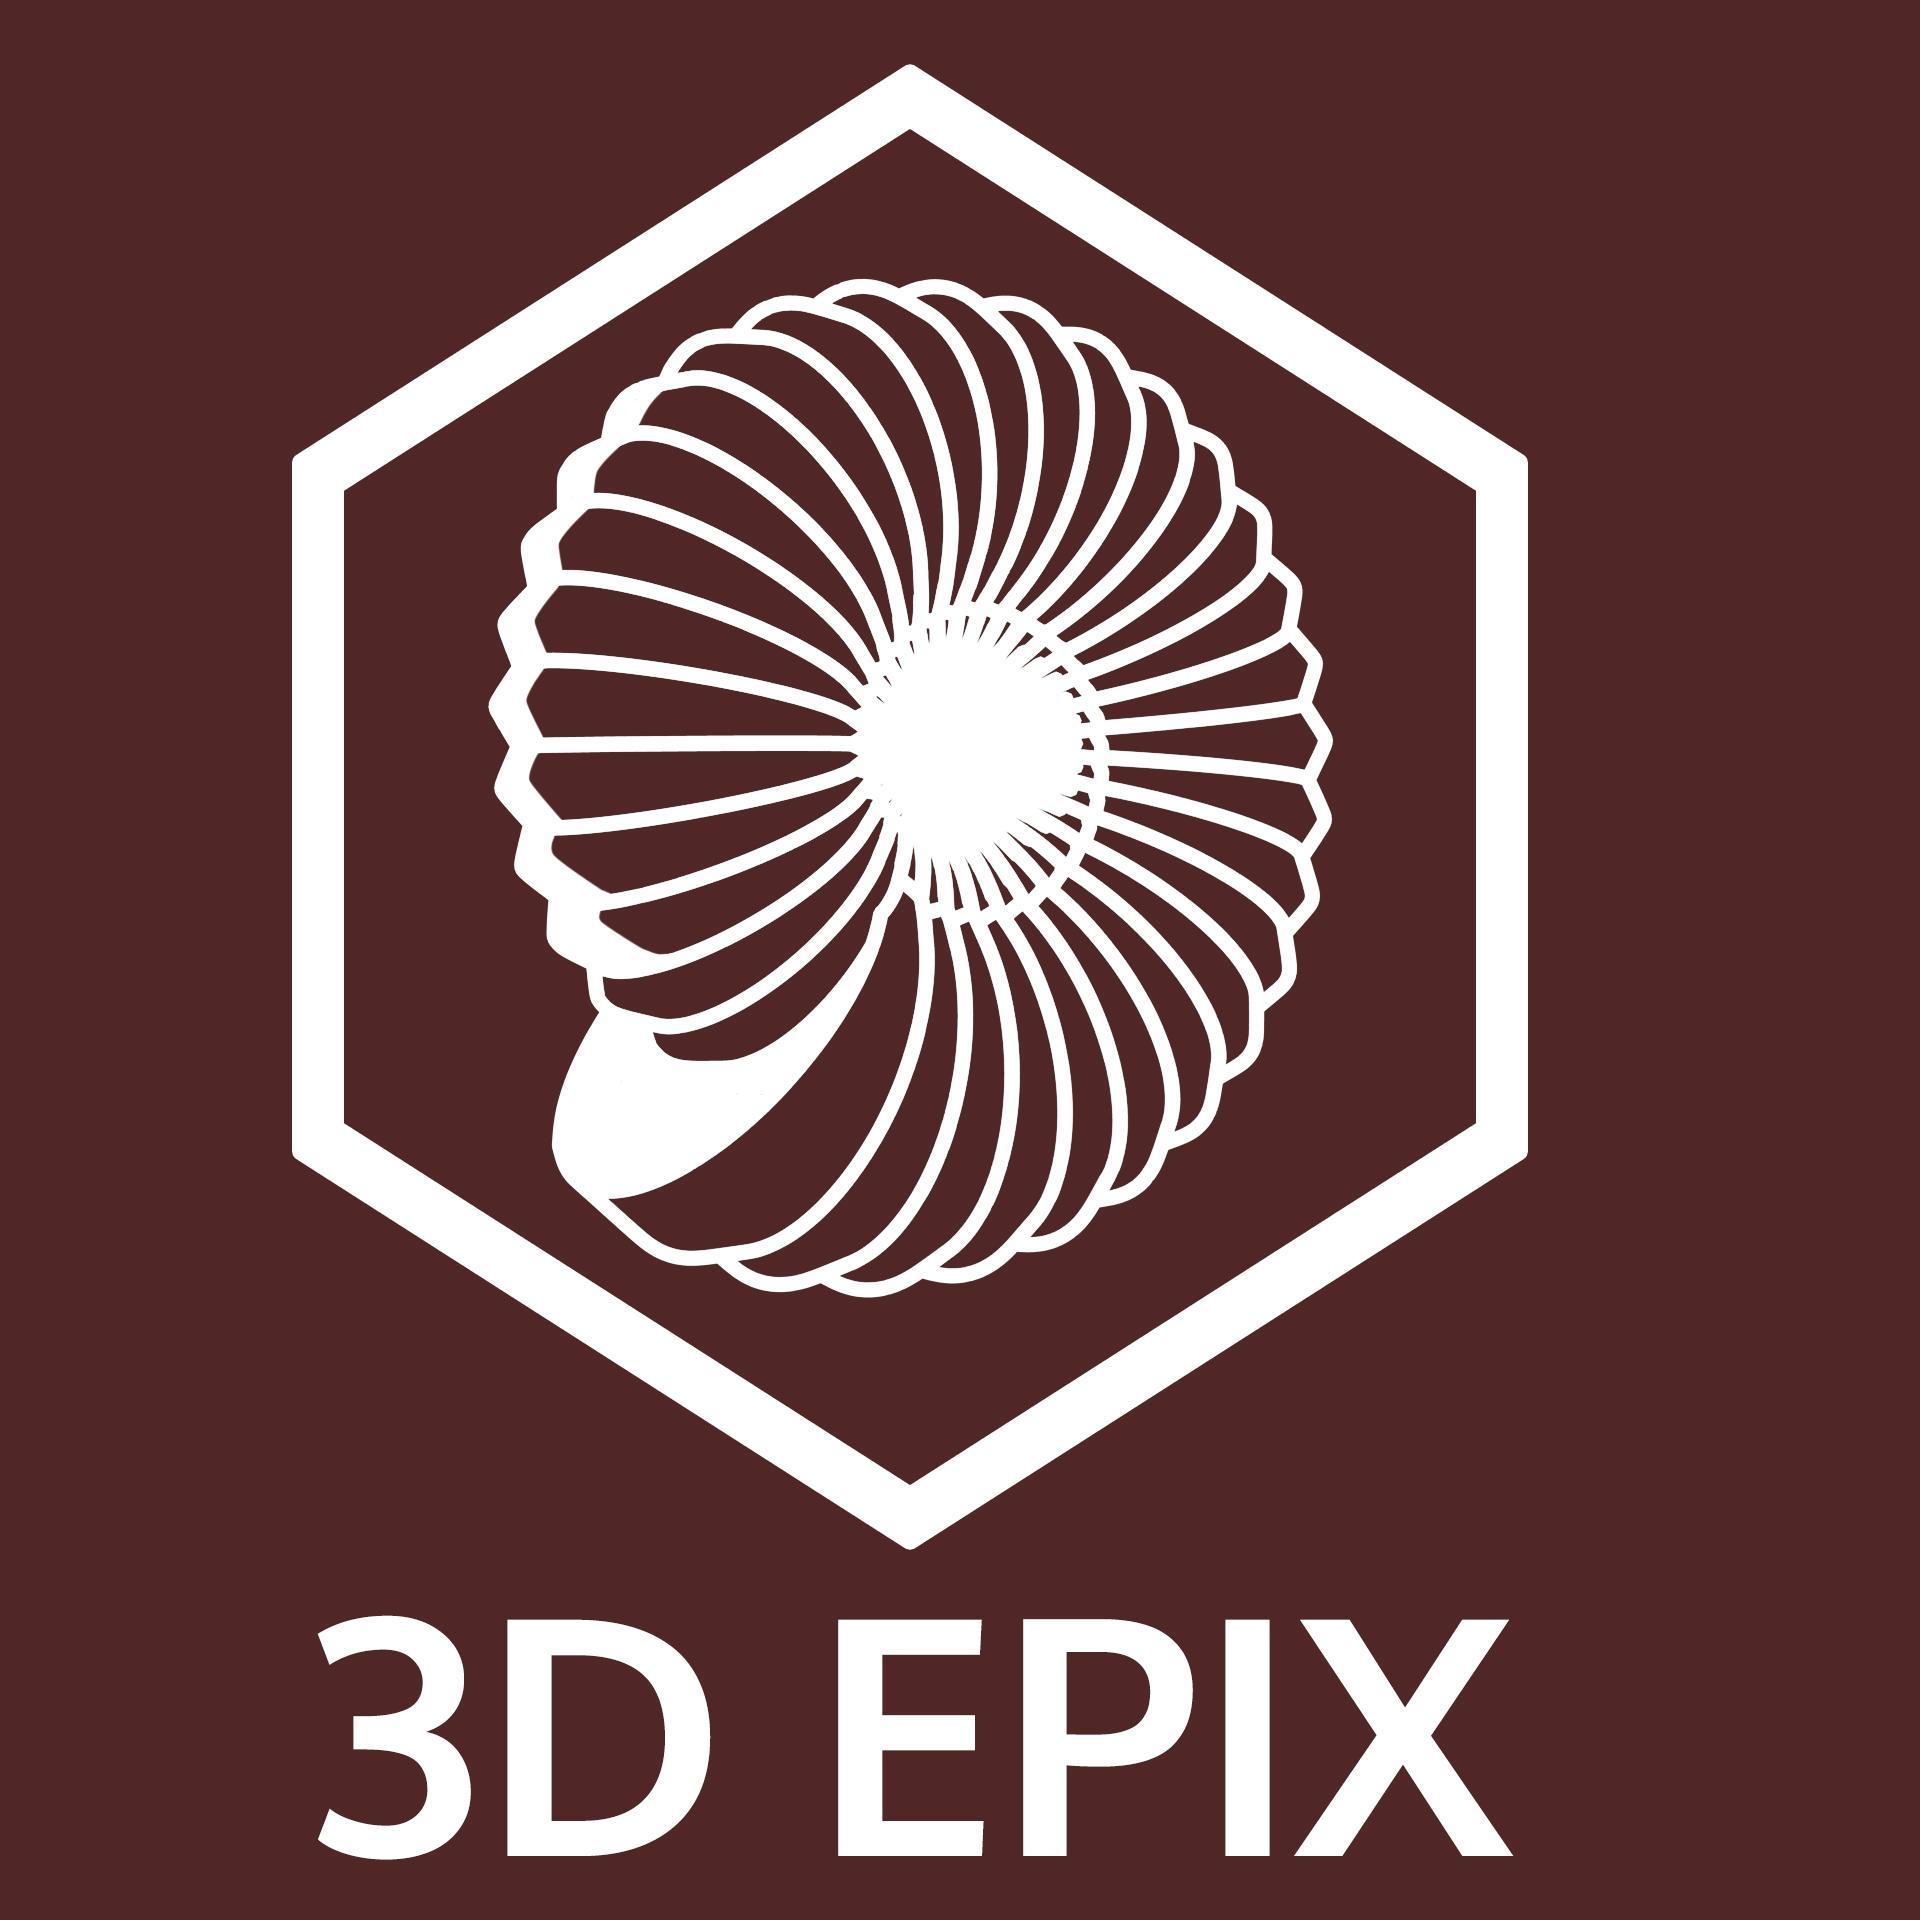 3D Epix is a Calgary, Alberta based company that offers a wide range of 3D Visualization and Animation services to the variety of industries.